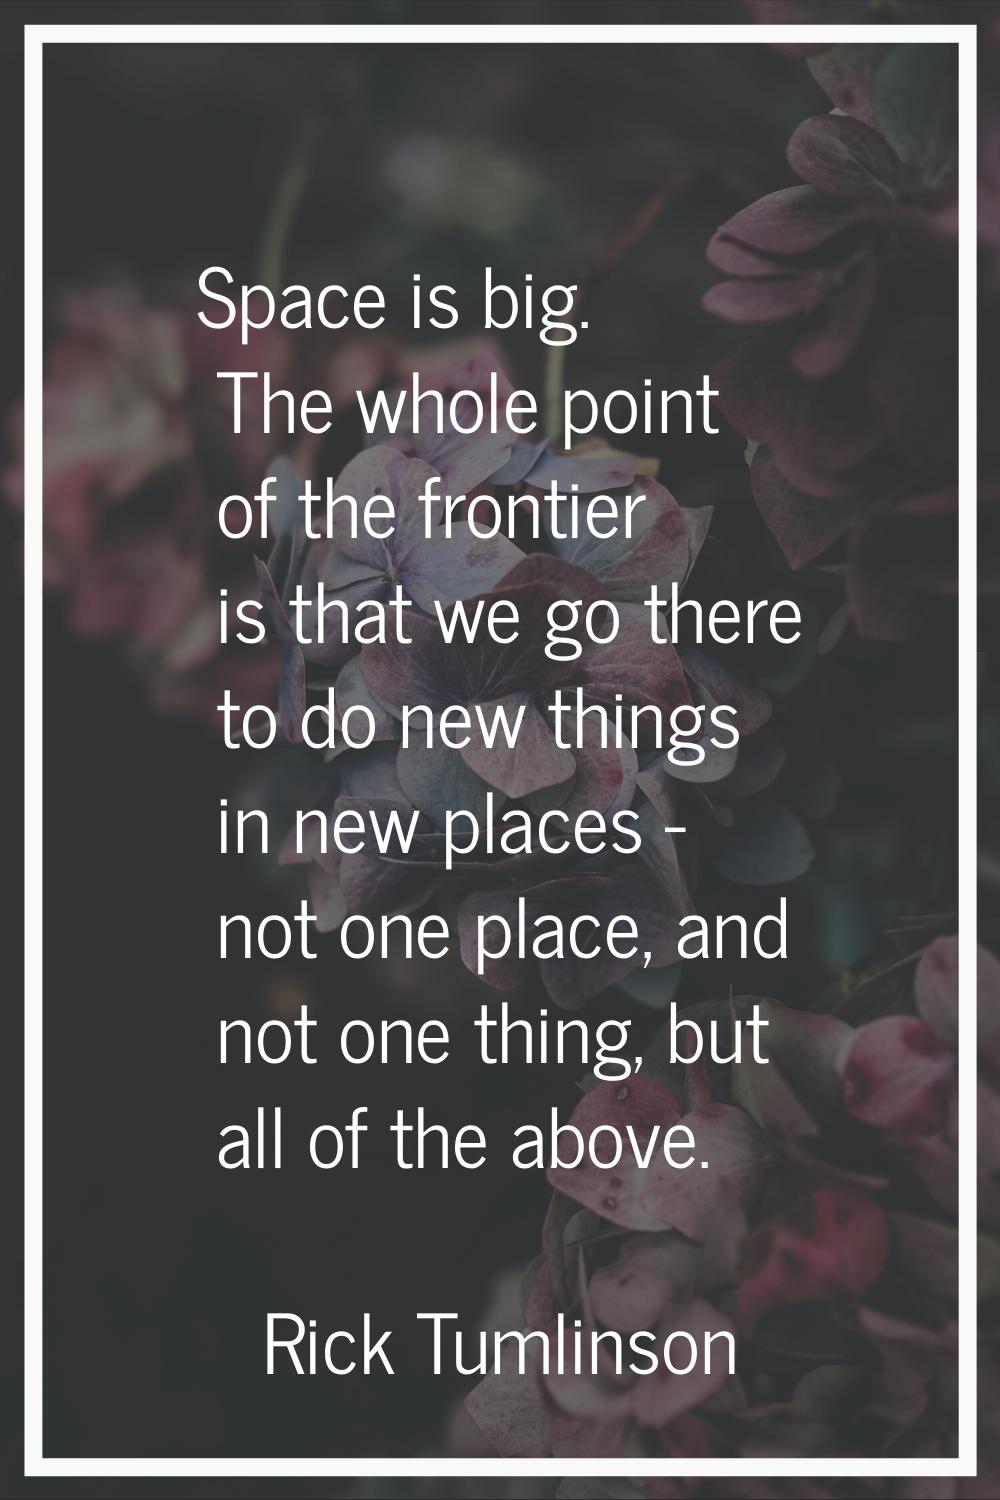 Space is big. The whole point of the frontier is that we go there to do new things in new places - 